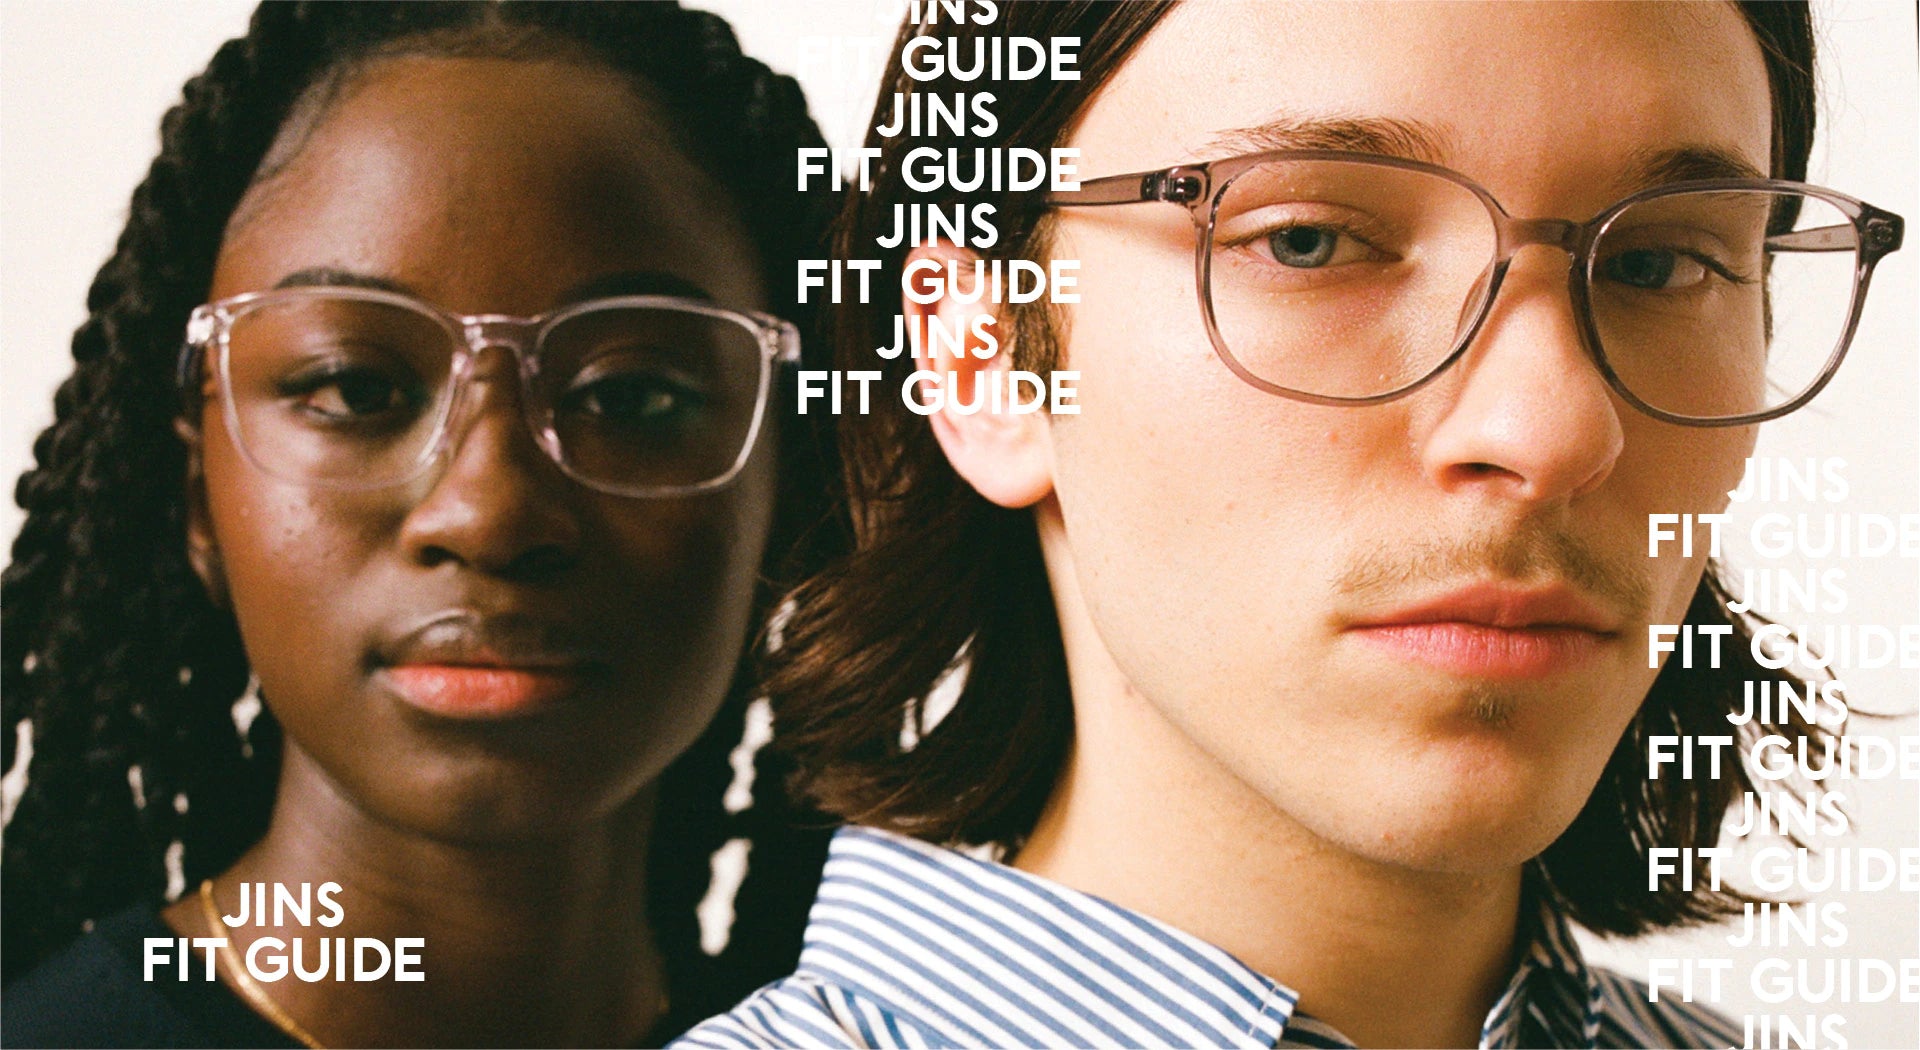 JINS Fit Guide male and female model wearing different nose bridge fit glasses